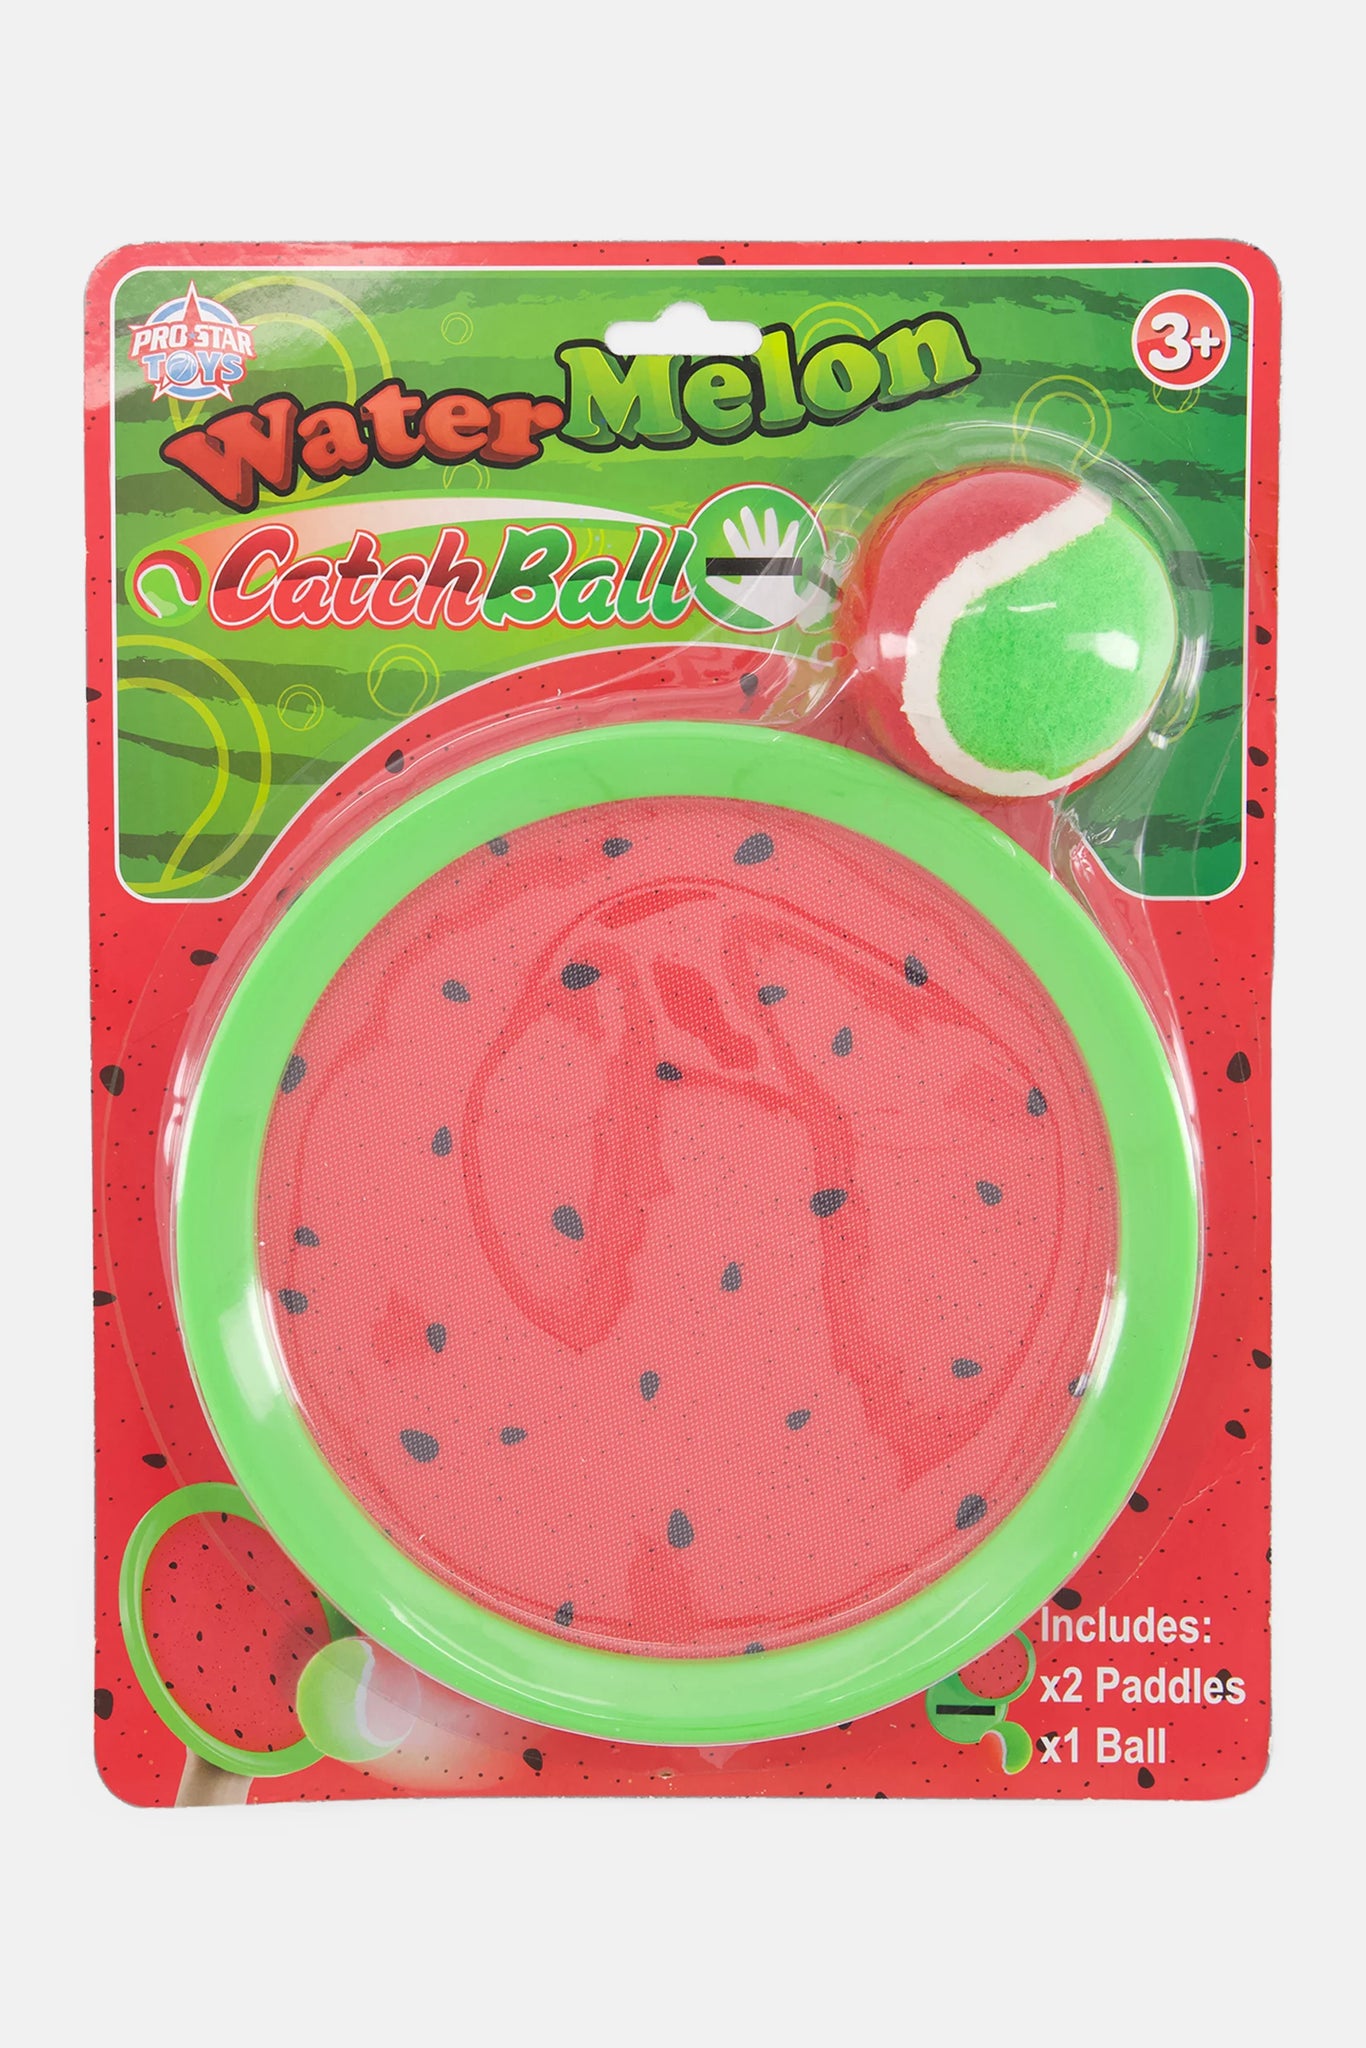 Pro Star Water Melon Velcro Catch Ball Red Combo